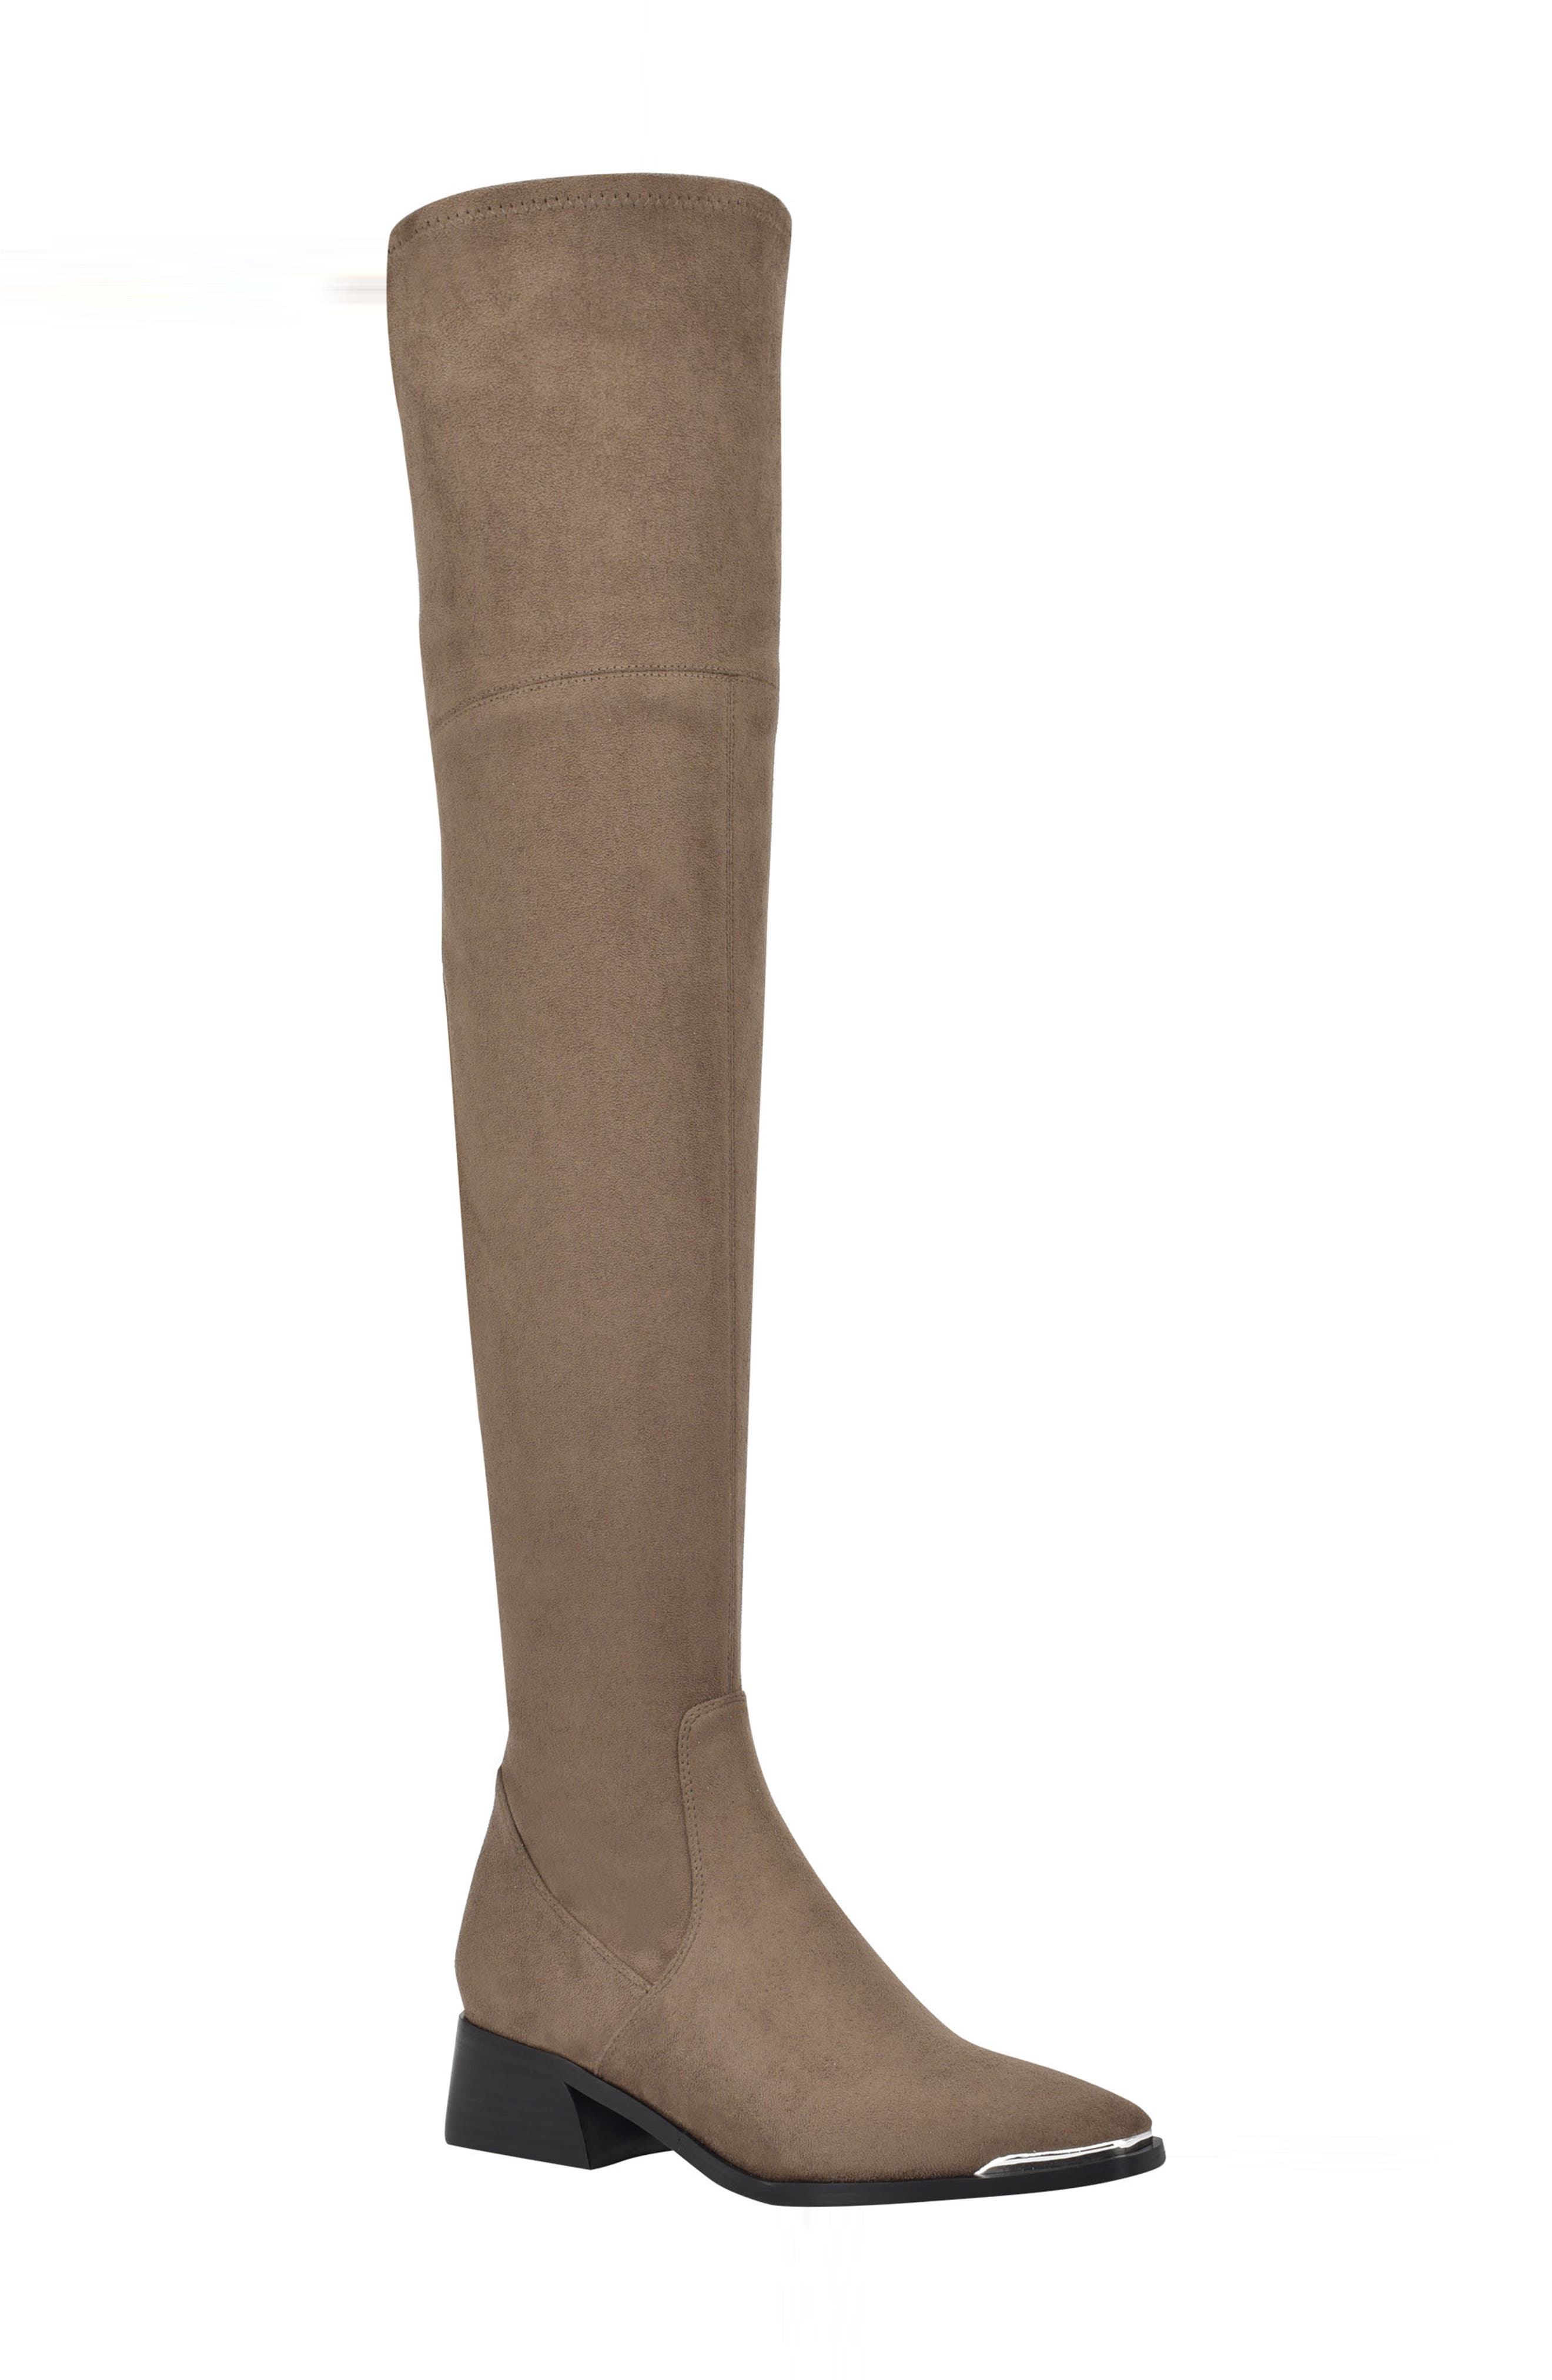 womens grey over the knee boots